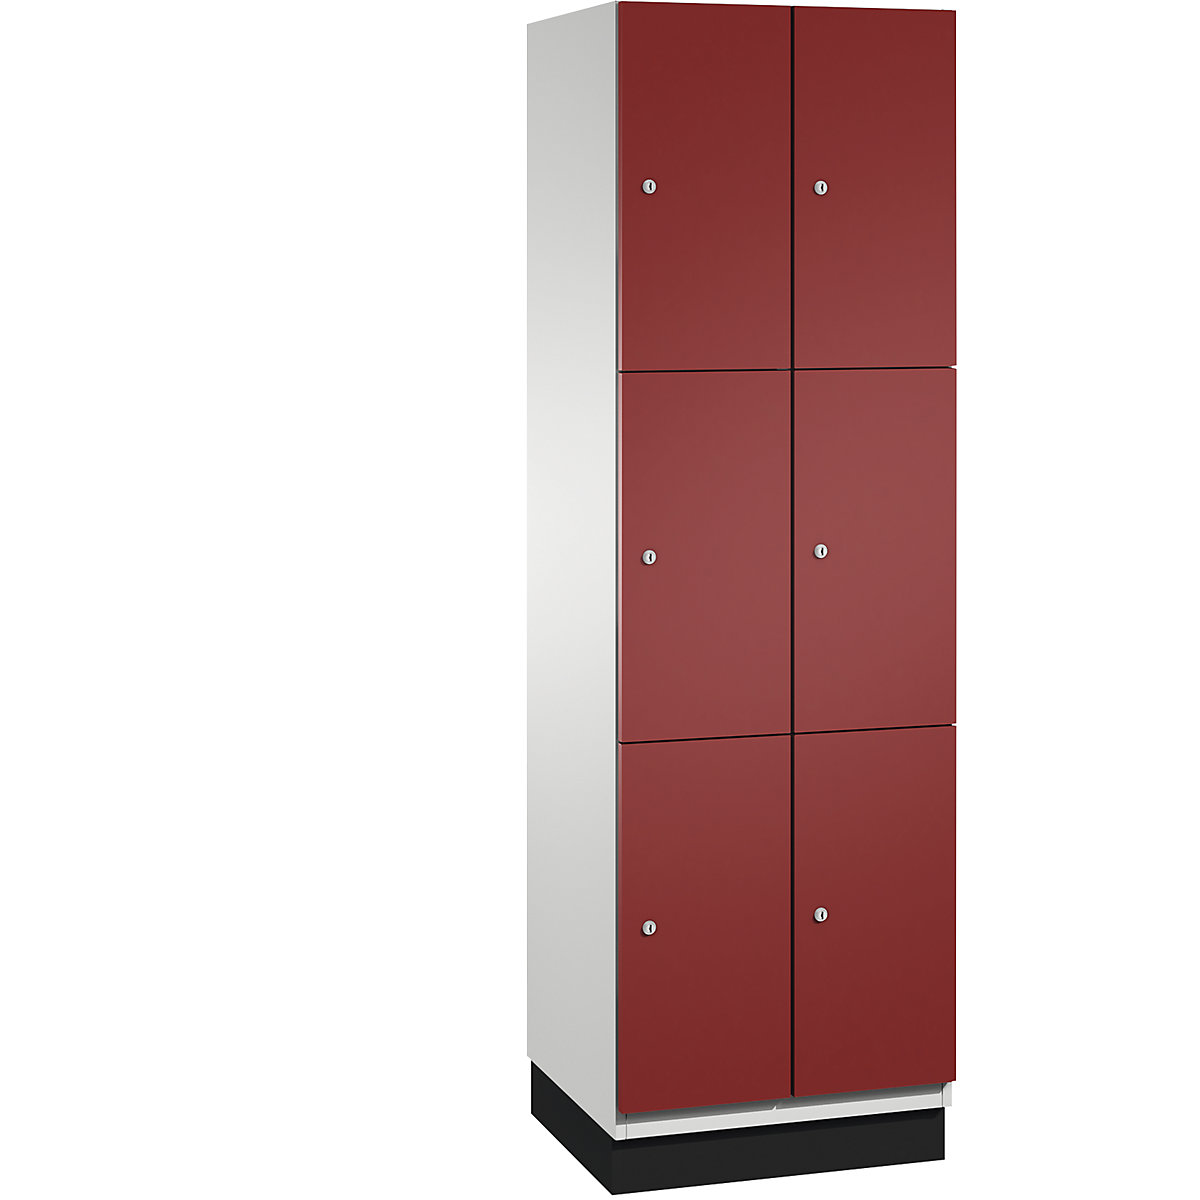 CAMBIO compartment locker with sheet steel doors – C+P, 6 compartments, width 600 mm, body light grey / door ruby red-4